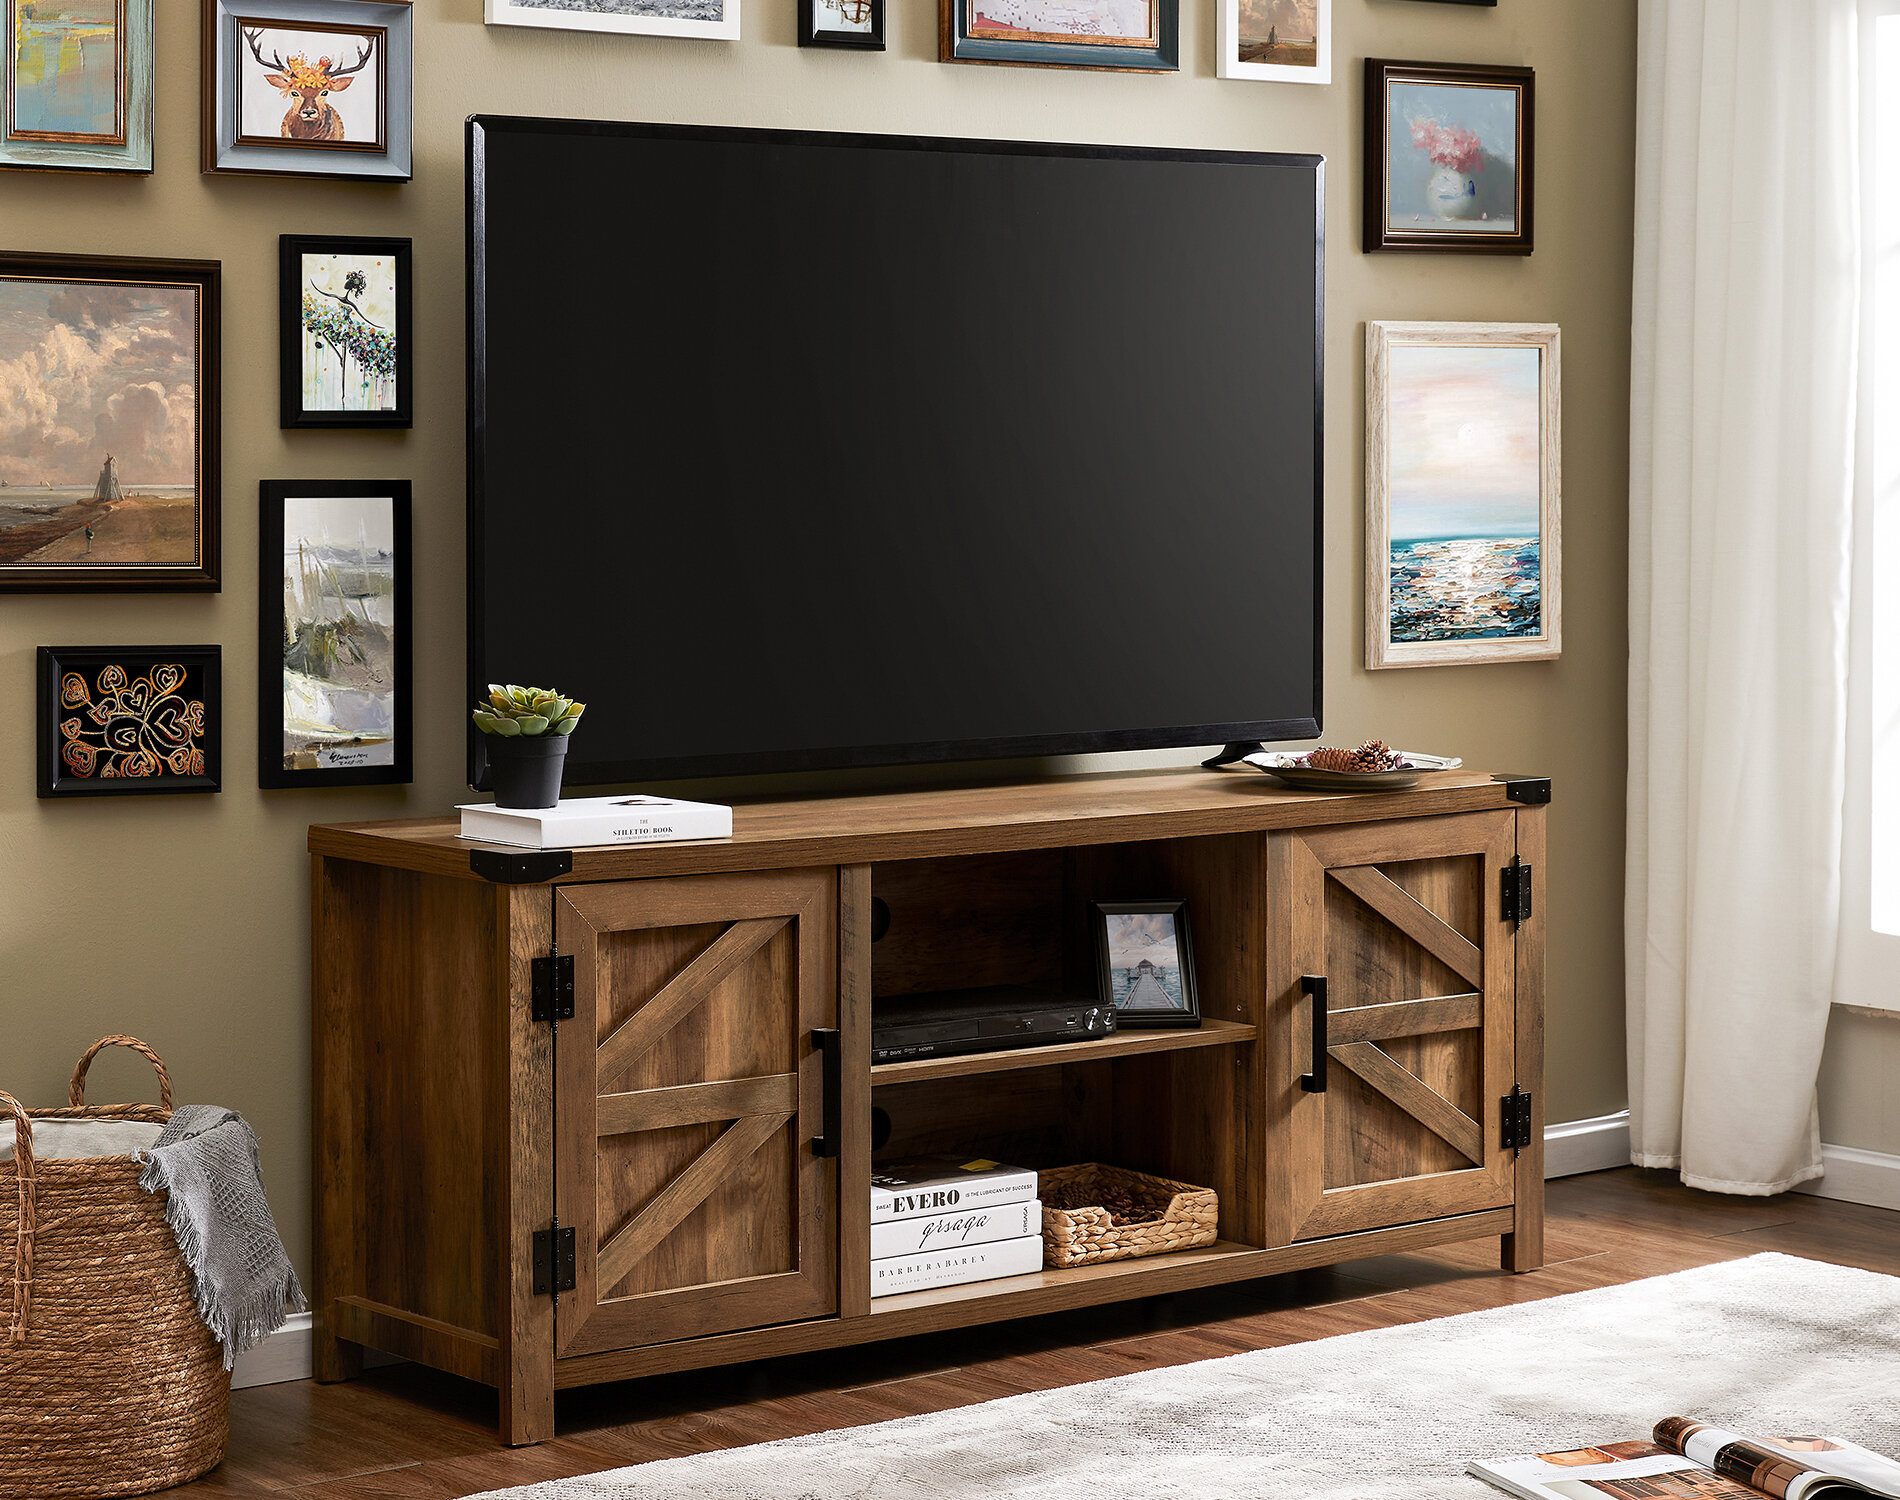 Gracie Oaks Pinder TV Stand for TVs up to 42" 